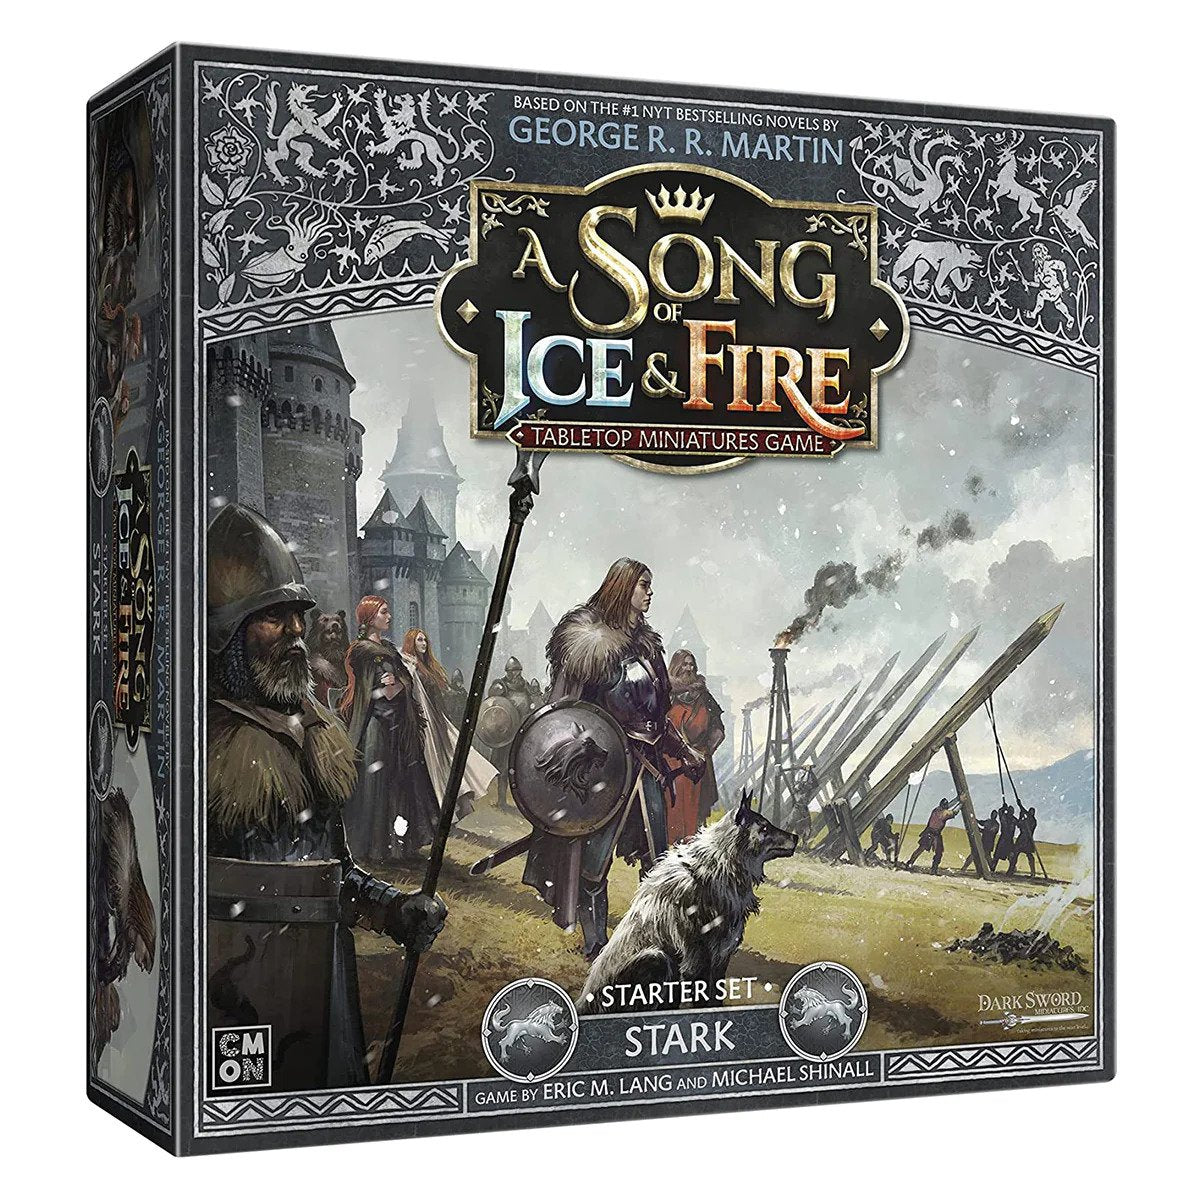 A Song of Ice and Fire Stark Starter Set